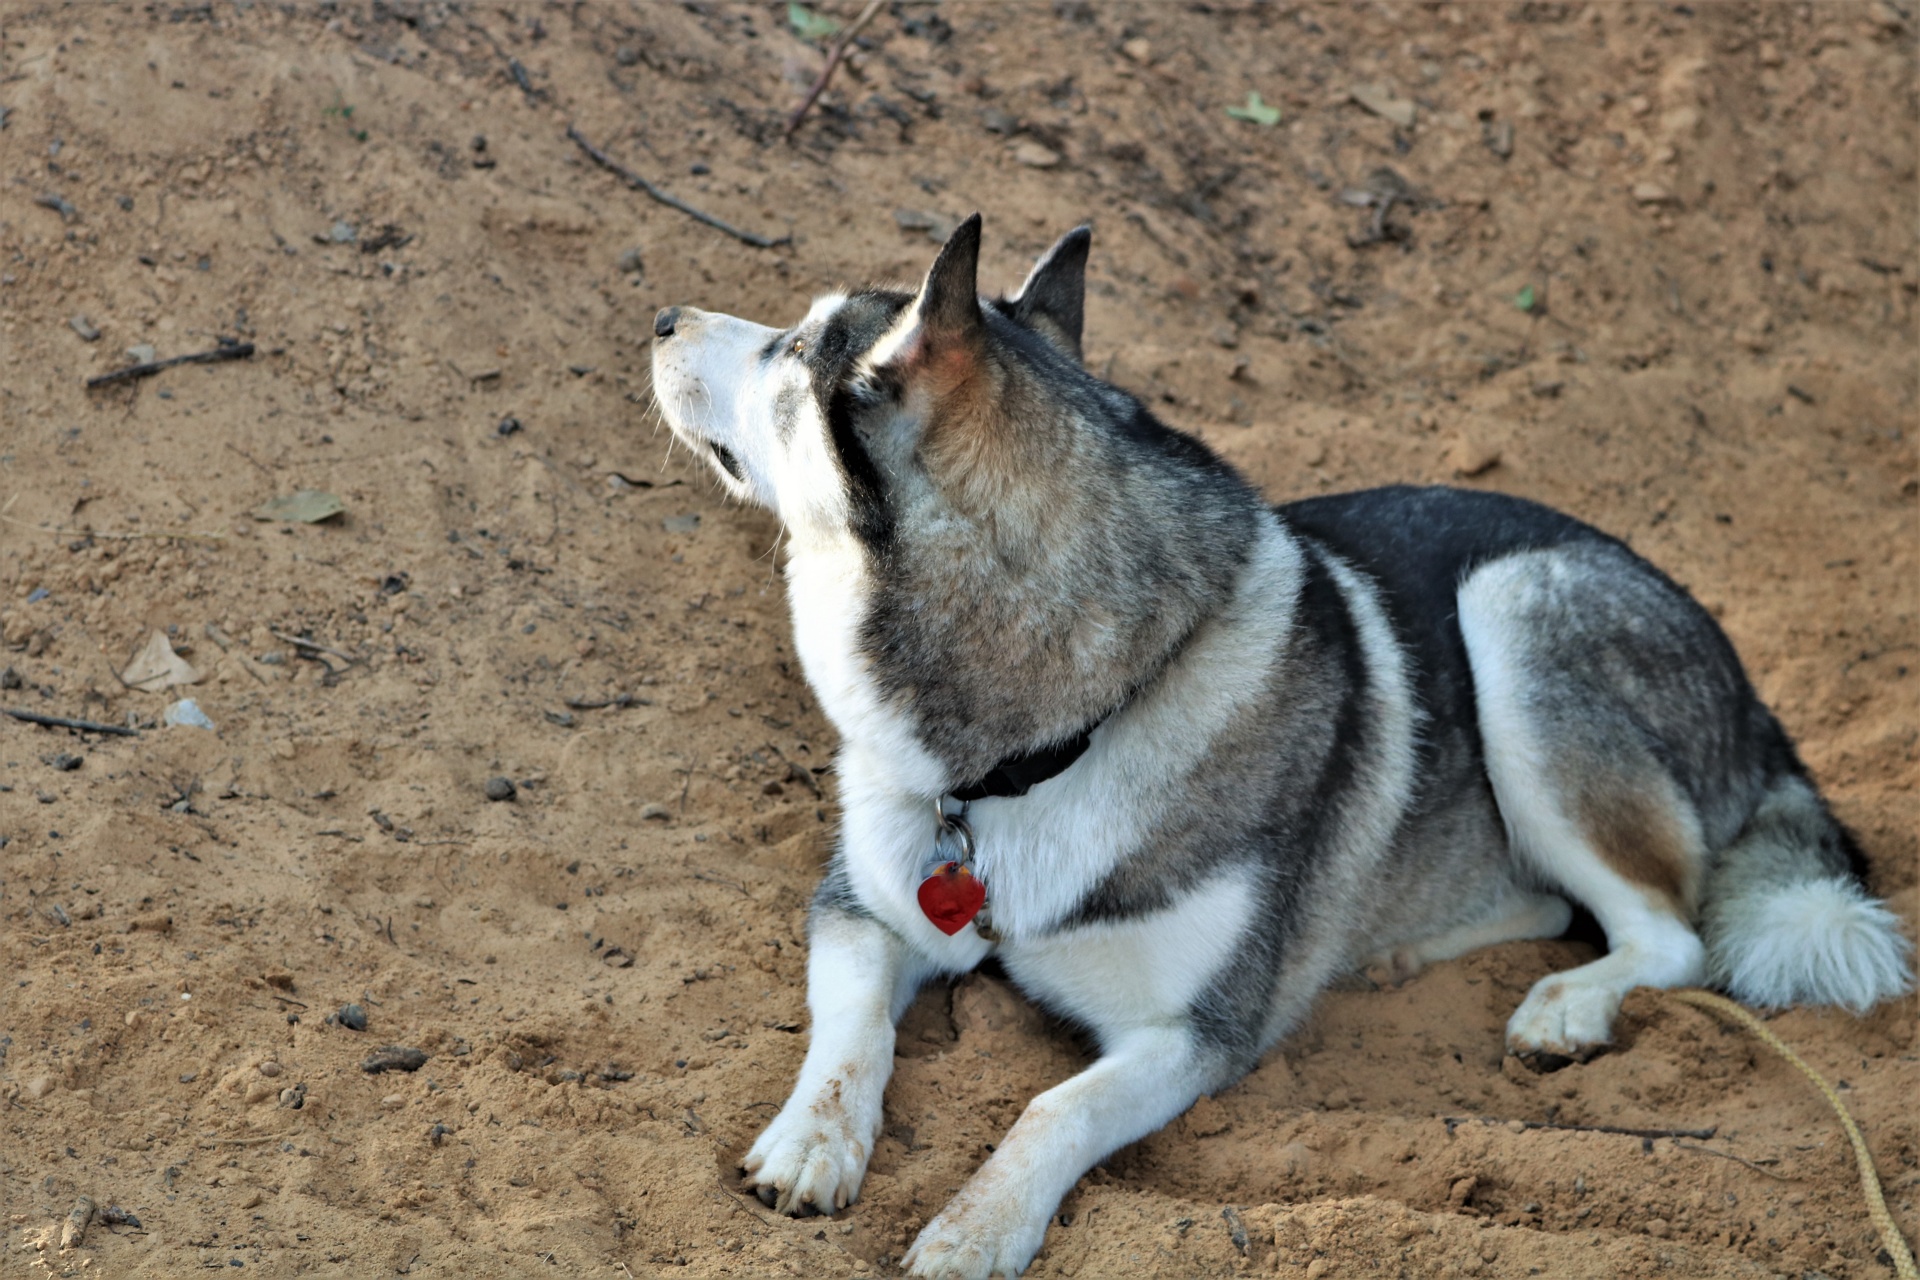 A gray and white Siberian husky dog, lying on a sandy beach, looking up.